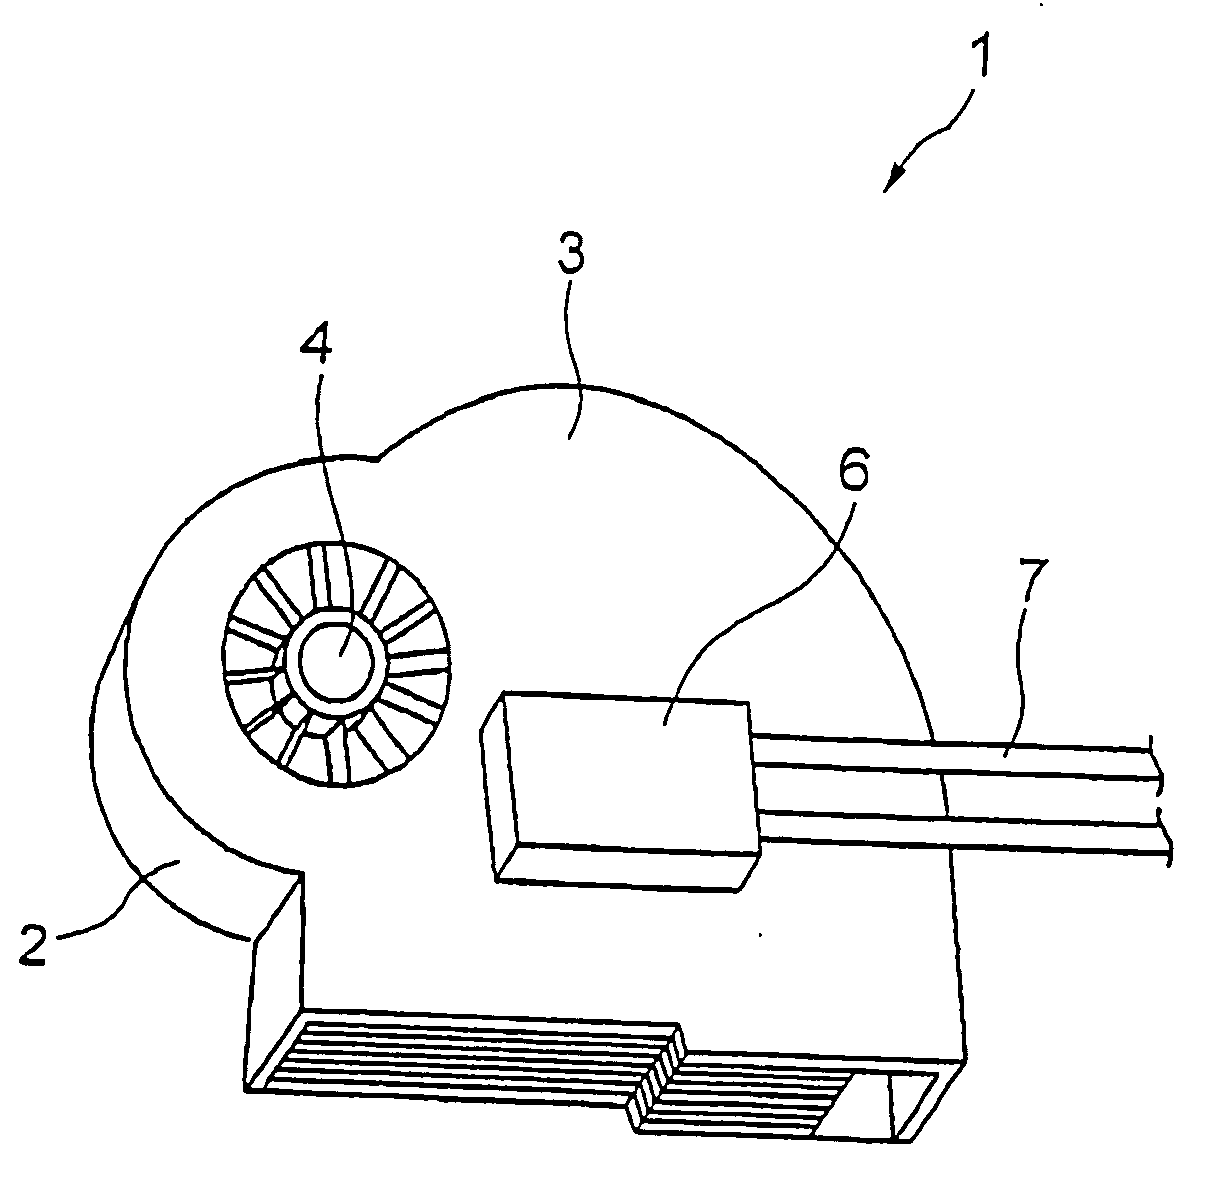 Heat sink with a centrifugal fan